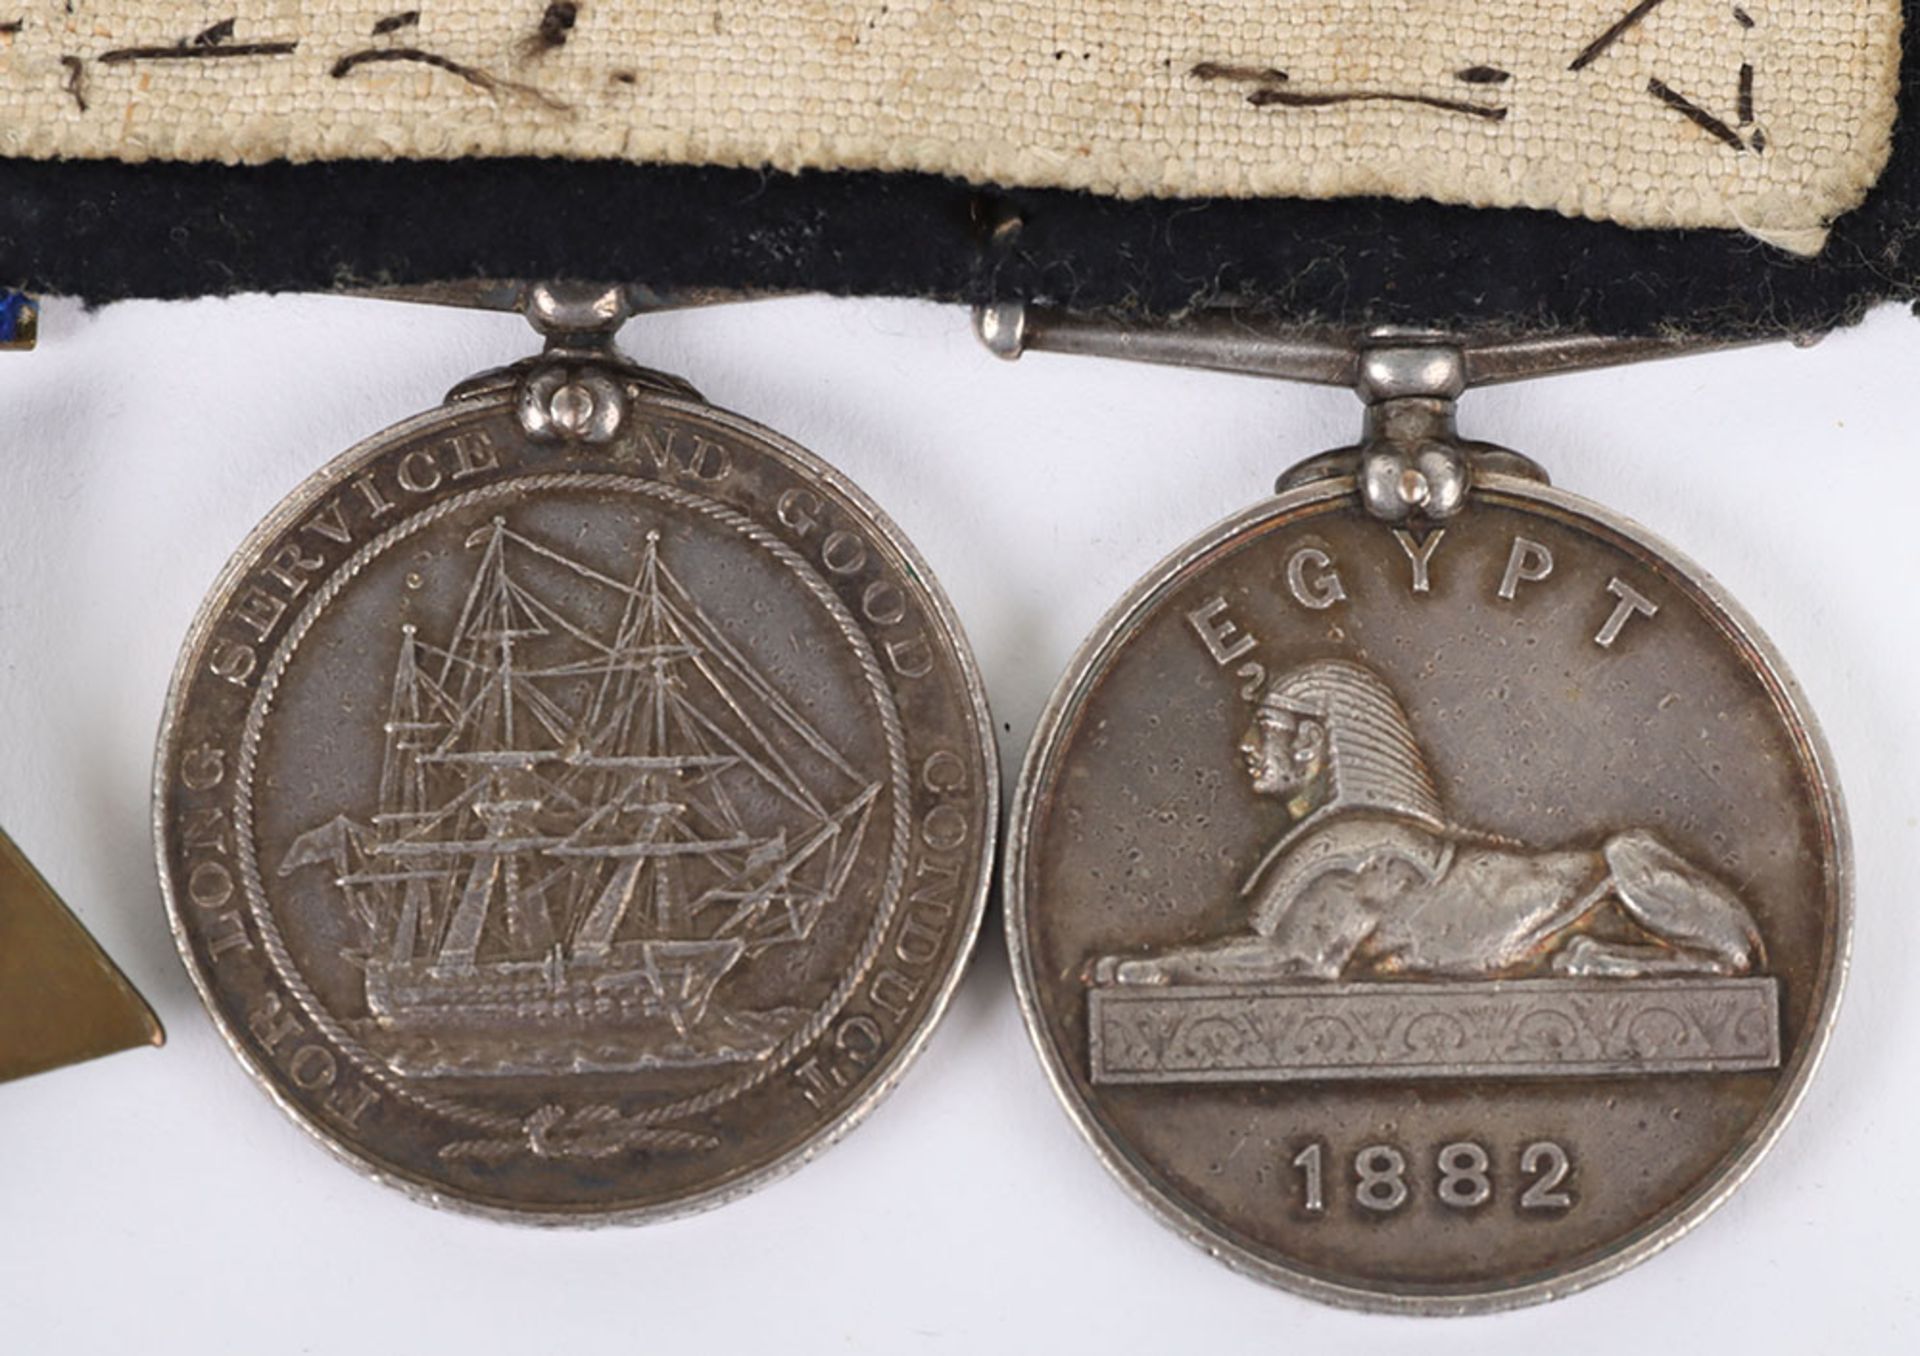 Royal Navy Long Service Medal Group of Three for Service in the 1882 Egypt Campaign - Image 8 of 9